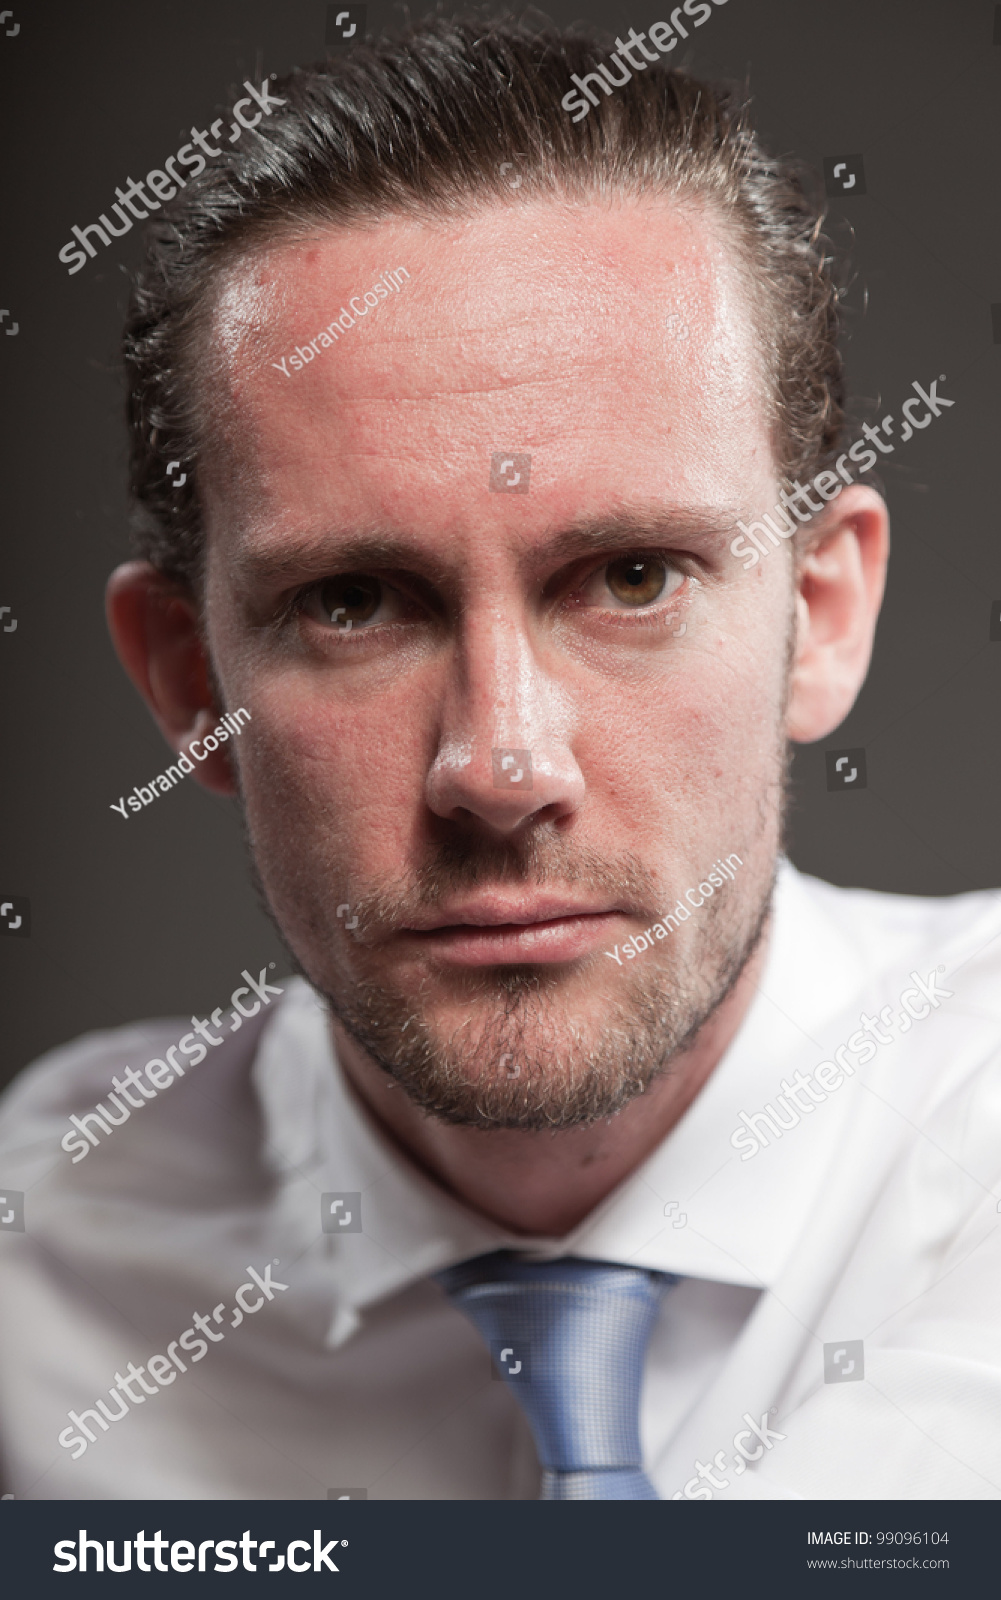 Young man brown hair wearing white shirt and blue tie showing emotions. Isolated on grey background. #99096104